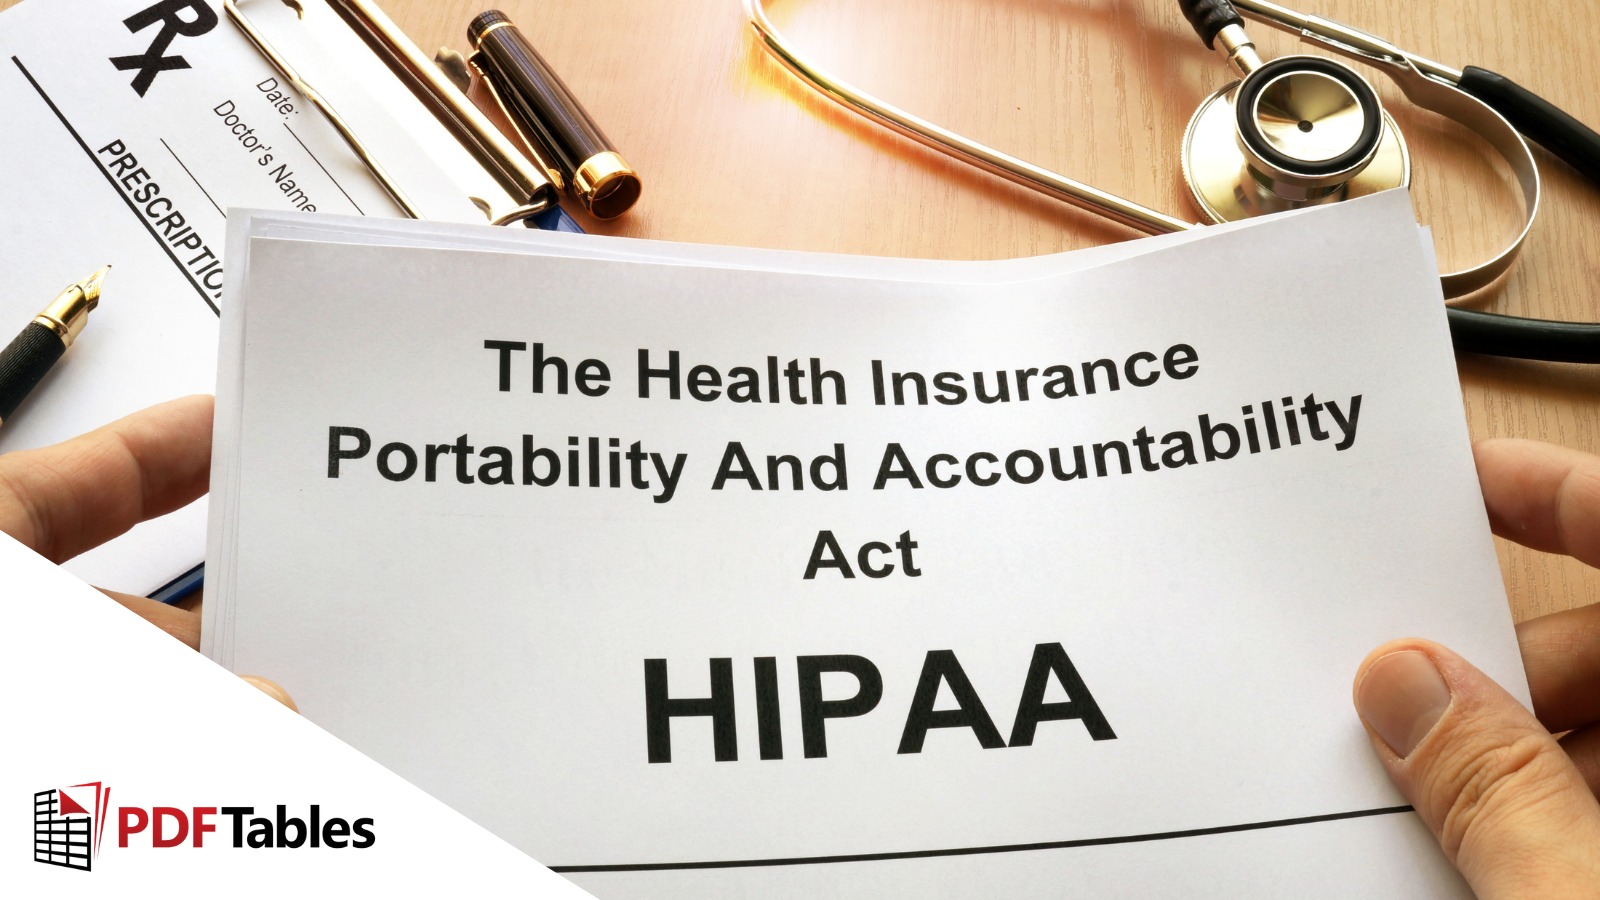 A desk with paper saying 'The Health Insurance Portability and Accountability Act HIPAA'.